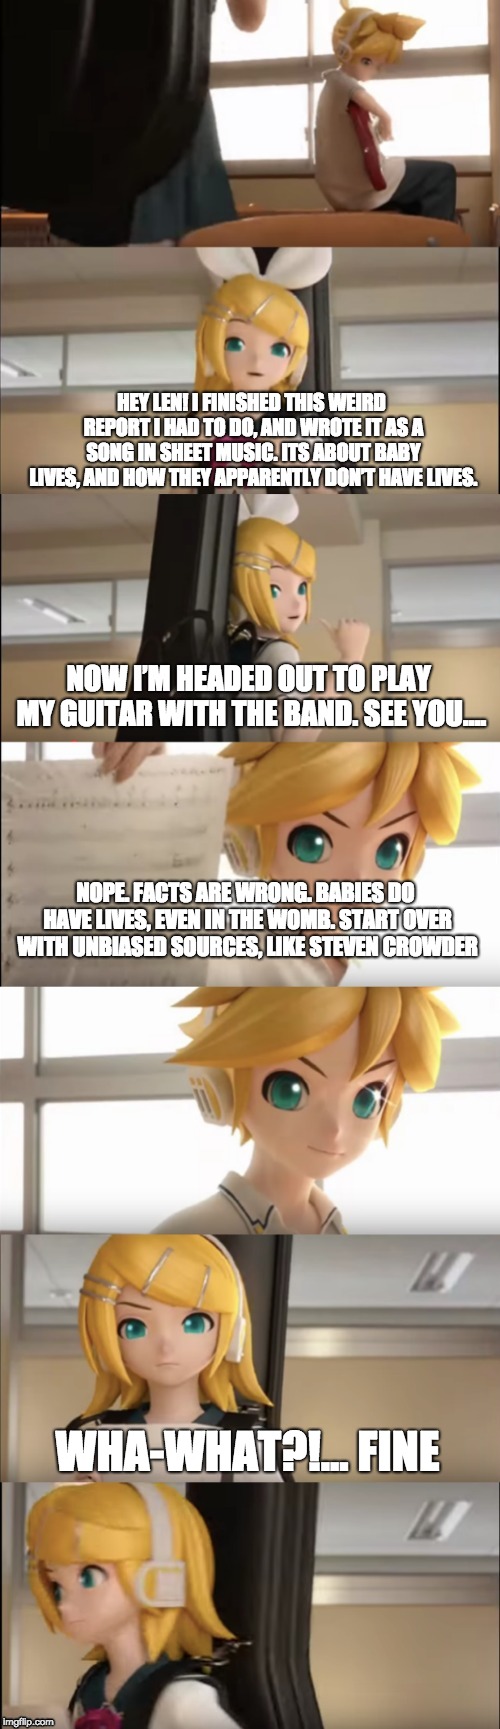 HEY LEN! I FINISHED THIS WEIRD REPORT I HAD TO DO, AND WROTE IT AS A SONG IN SHEET MUSIC. ITS ABOUT BABY LIVES, AND HOW THEY APPARENTLY DON’ | image tagged in rin and len kagamine sibling conversation | made w/ Imgflip meme maker